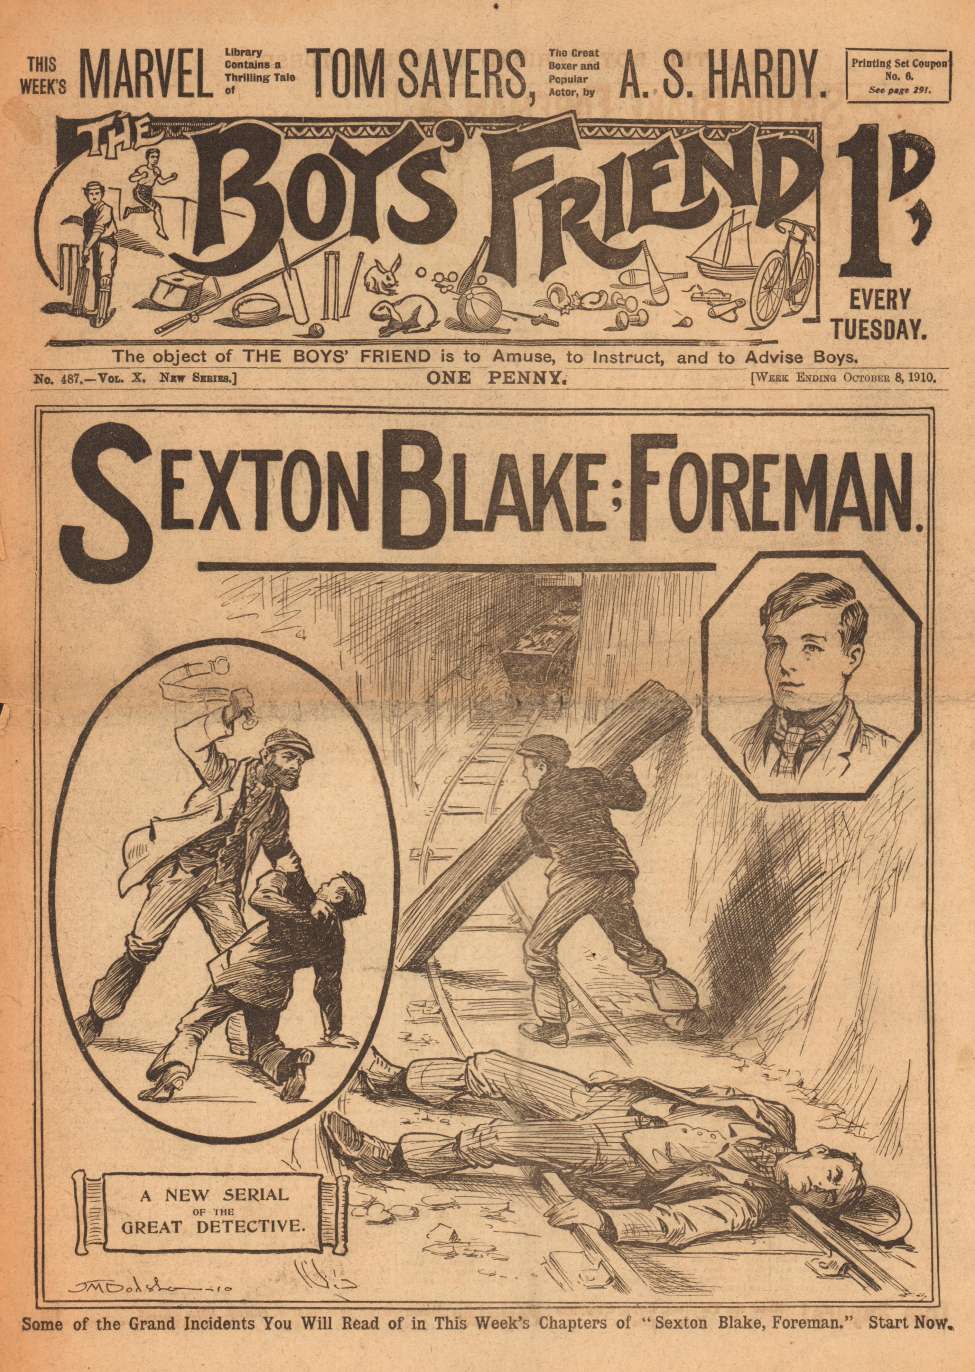 Comic Book Cover For The Boys' Friend 487 - Sexton Blake: Foreman